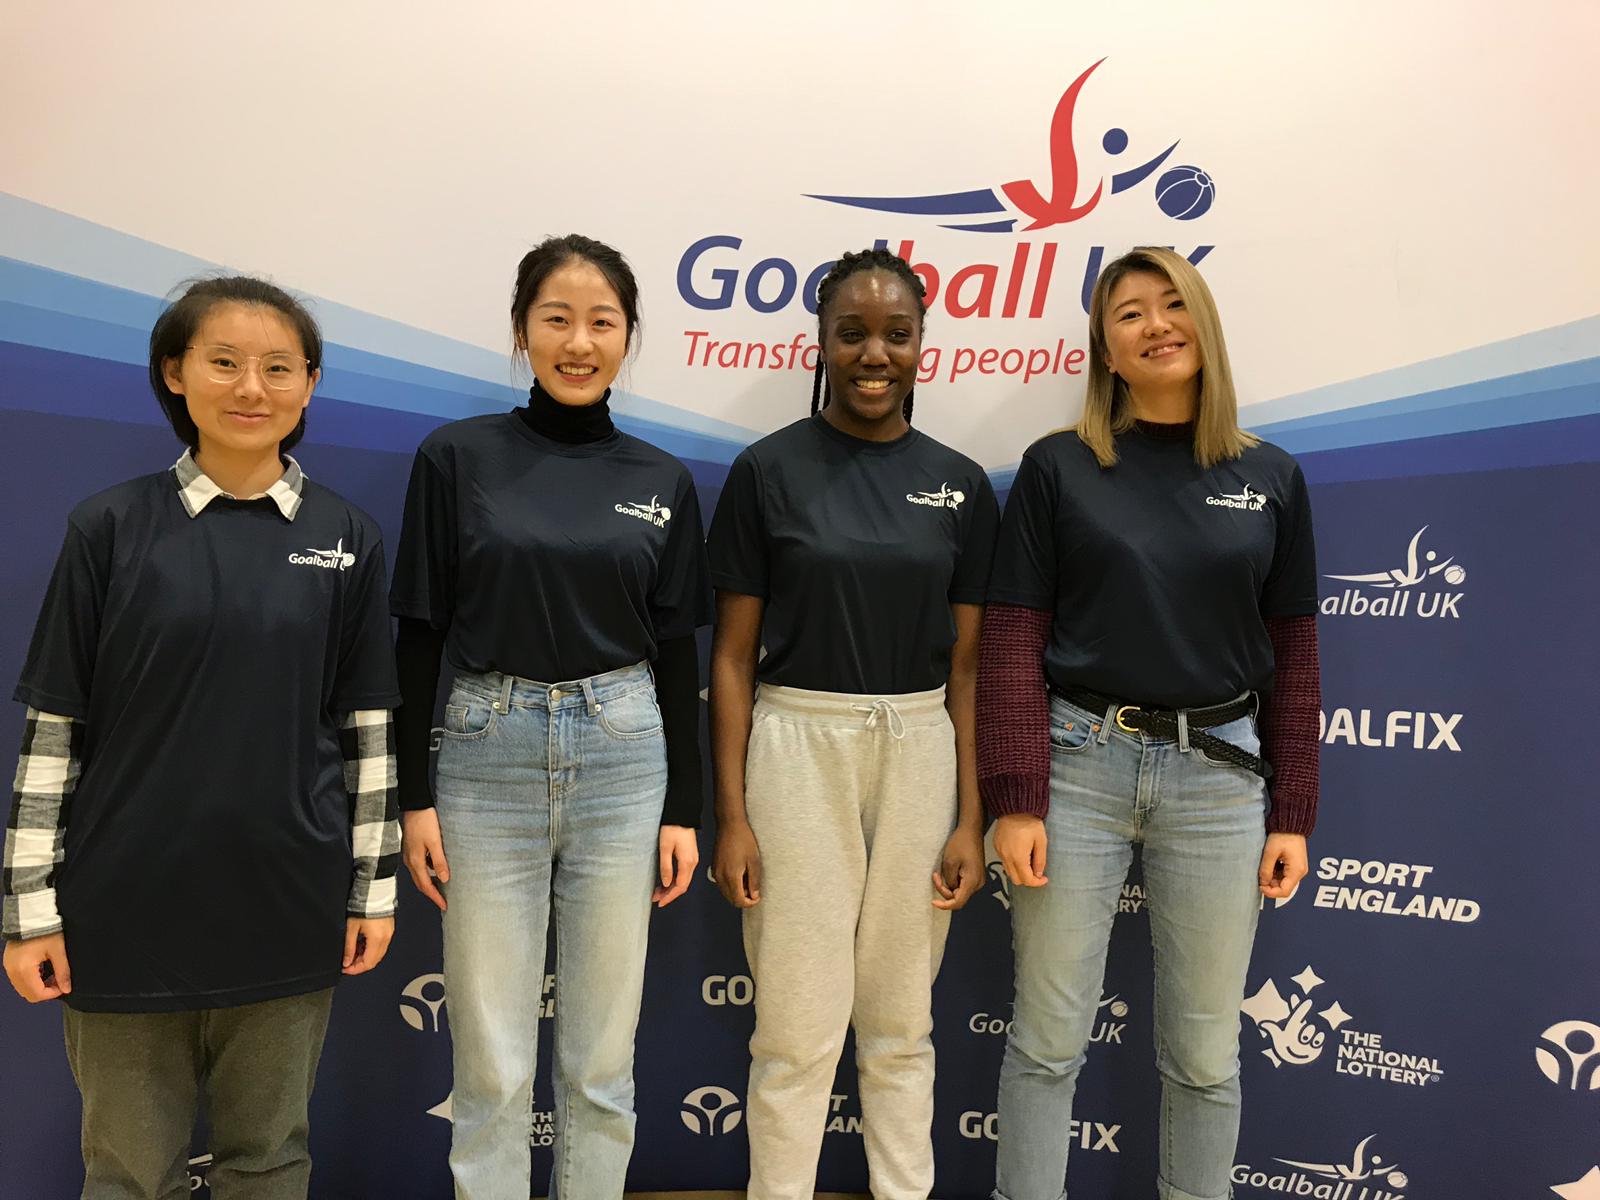 A group of international students volunteering at a tournament in Bristol